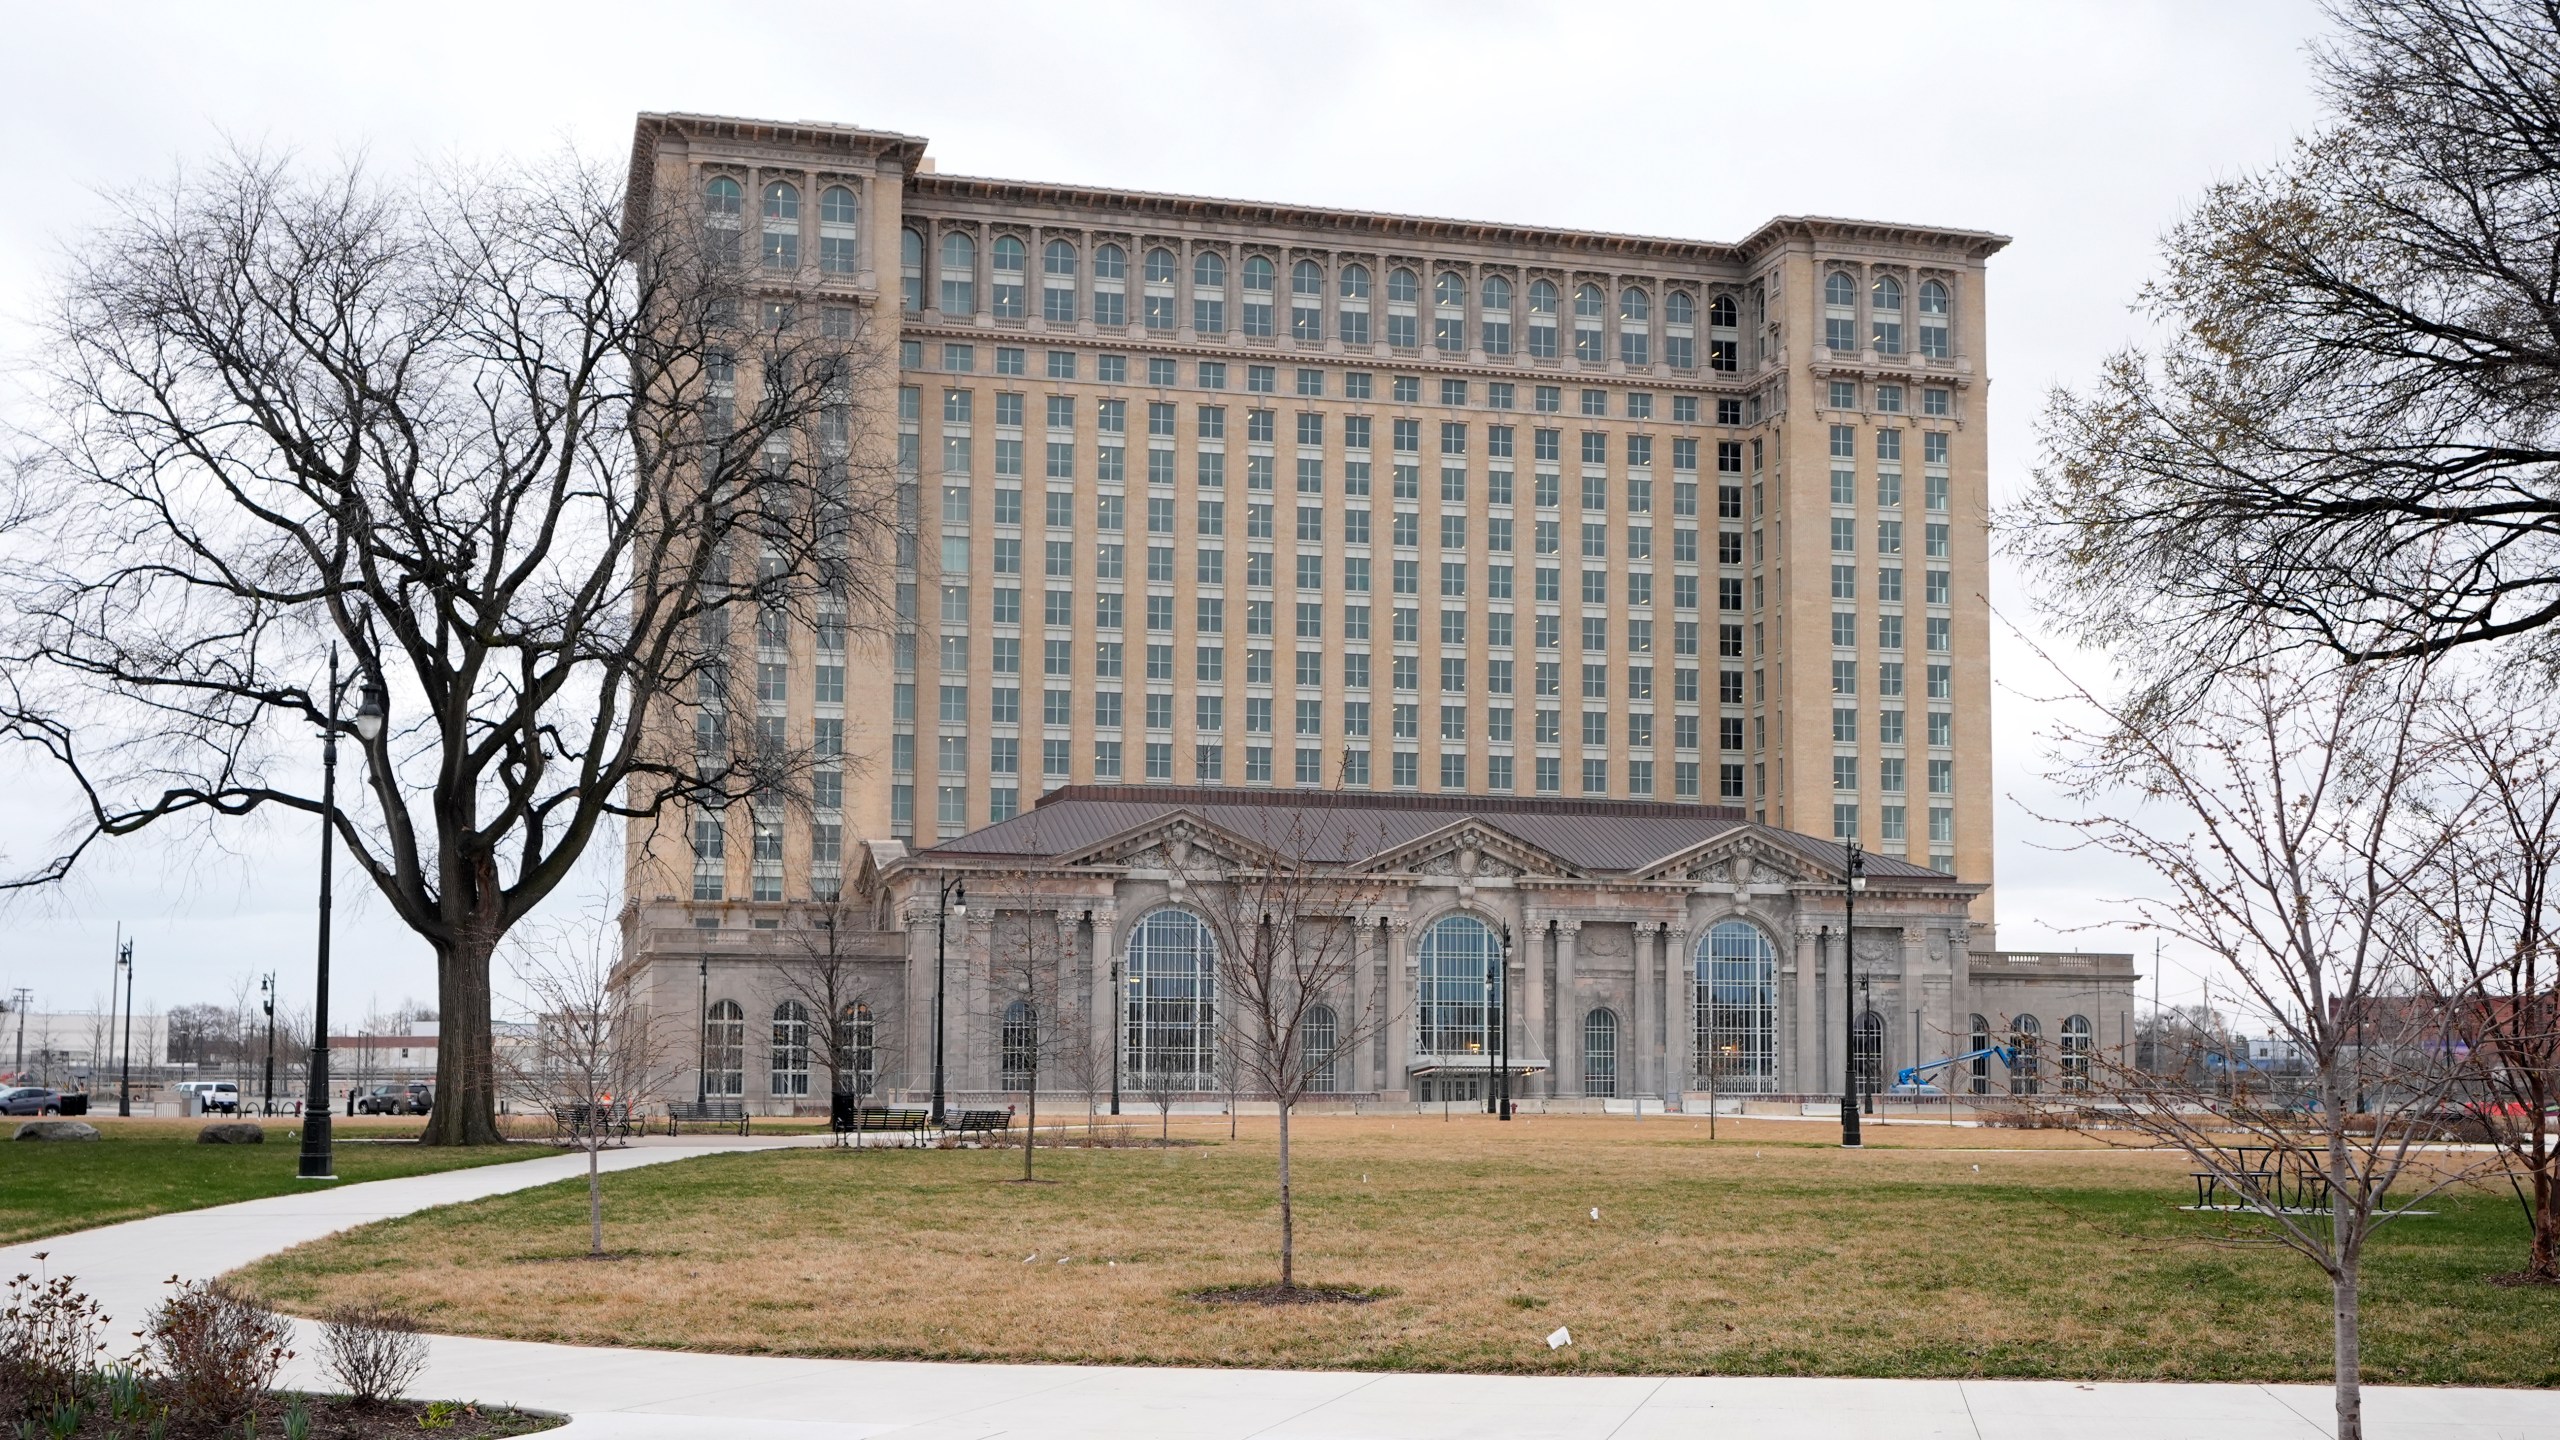 The Michigan Central Station is seen Monday, March 18, 2024, in Detroit. Bill Ford, executive chair of Ford Motor Co., and his wife Lisa Ford are raising $10 million to help ten Detroit nonprofit organizations that serve young people start endowments. Lisa Ford said the campaign comes alongside Ford's investment in the refurbishment of the long abandoned train station. (AP Photo/Carlos Osorio)